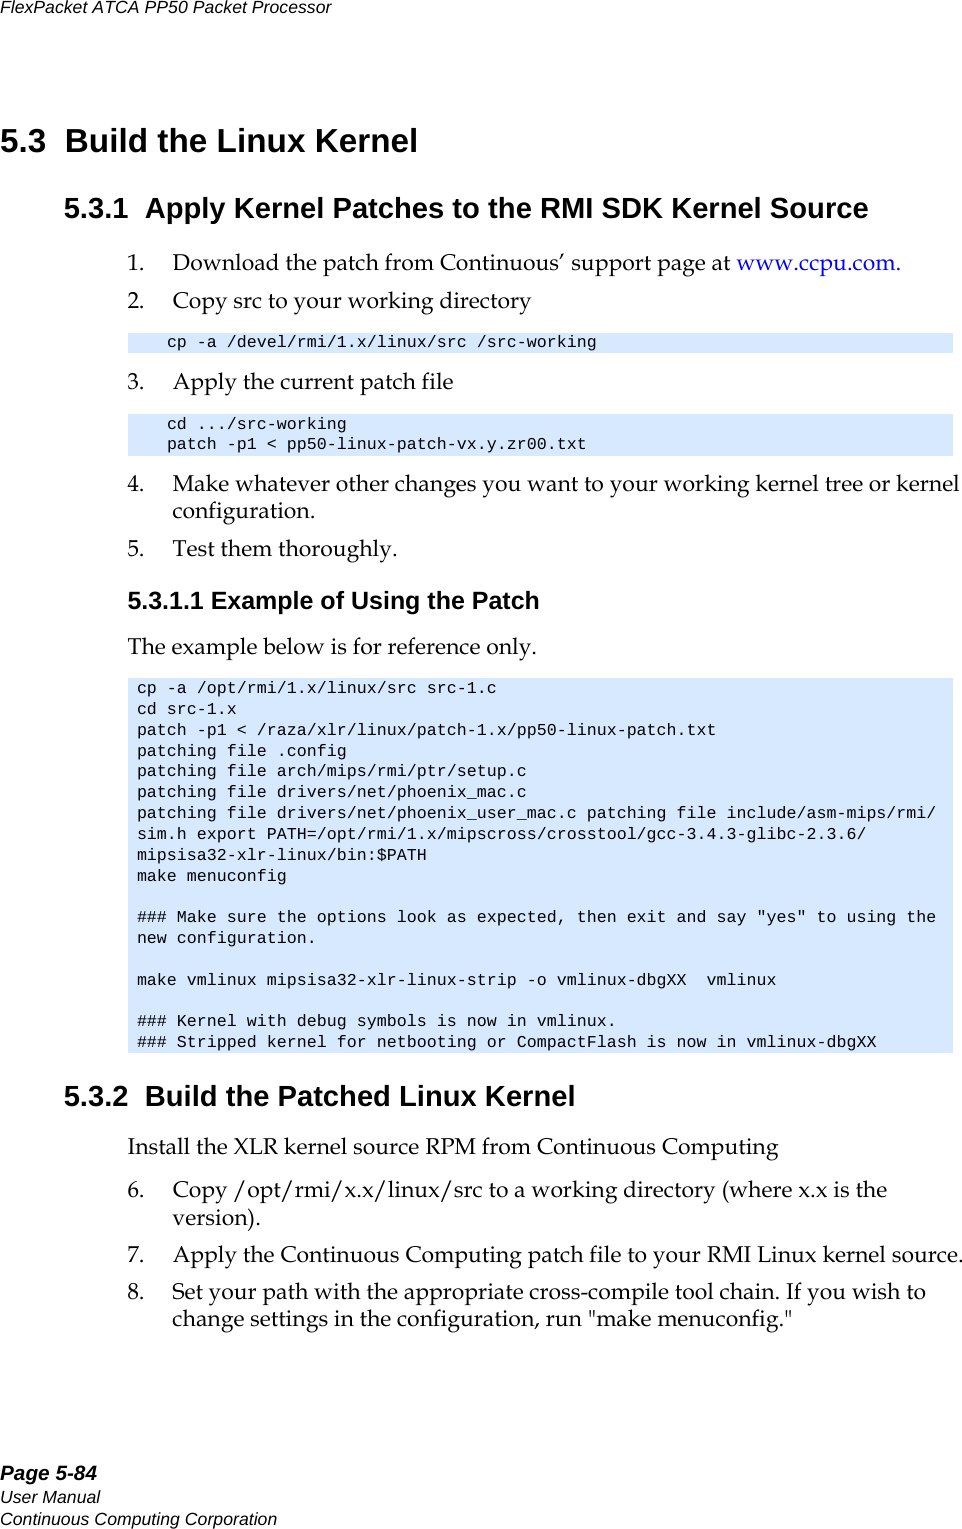 Page 5-84User ManualContinuous Computing CorporationFlexPacket ATCA PP50 Packet Processor     Preliminary5.3  Build the Linux Kernel5.3.1  Apply Kernel Patches to the RMI SDK Kernel Source 1. Download the patch from Continuous’ support page at www.ccpu.com.2. Copy src to your working directory3. Apply the current patch file4. Make whatever other changes you want to your working kernel tree or kernel configuration.5. Test them thoroughly.5.3.1.1 Example of Using the PatchThe example below is for reference only.5.3.2  Build the Patched Linux KernelInstall the XLR kernel source RPM from Continuous Computing6. Copy /opt/rmi/x.x/linux/src to a working directory (where x.x is the version). 7. Apply the Continuous Computing patch file to your RMI Linux kernel source.8. Set your path with the appropriate cross-compile tool chain. If you wish to change settings in the configuration, run &quot;make menuconfig.&quot; cp -a /devel/rmi/1.x/linux/src /src-working cd .../src-workingpatch -p1 &lt; pp50-linux-patch-vx.y.zr00.txtcp -a /opt/rmi/1.x/linux/src src-1.c cd src-1.x patch -p1 &lt; /raza/xlr/linux/patch-1.x/pp50-linux-patch.txtpatching file .configpatching file arch/mips/rmi/ptr/setup.cpatching file drivers/net/phoenix_mac.cpatching file drivers/net/phoenix_user_mac.c patching file include/asm-mips/rmi/sim.h export PATH=/opt/rmi/1.x/mipscross/crosstool/gcc-3.4.3-glibc-2.3.6/mipsisa32-xlr-linux/bin:$PATHmake menuconfig### Make sure the options look as expected, then exit and say &quot;yes&quot; to using the new configuration.make vmlinux mipsisa32-xlr-linux-strip -o vmlinux-dbgXX  vmlinux### Kernel with debug symbols is now in vmlinux.### Stripped kernel for netbooting or CompactFlash is now in vmlinux-dbgXX